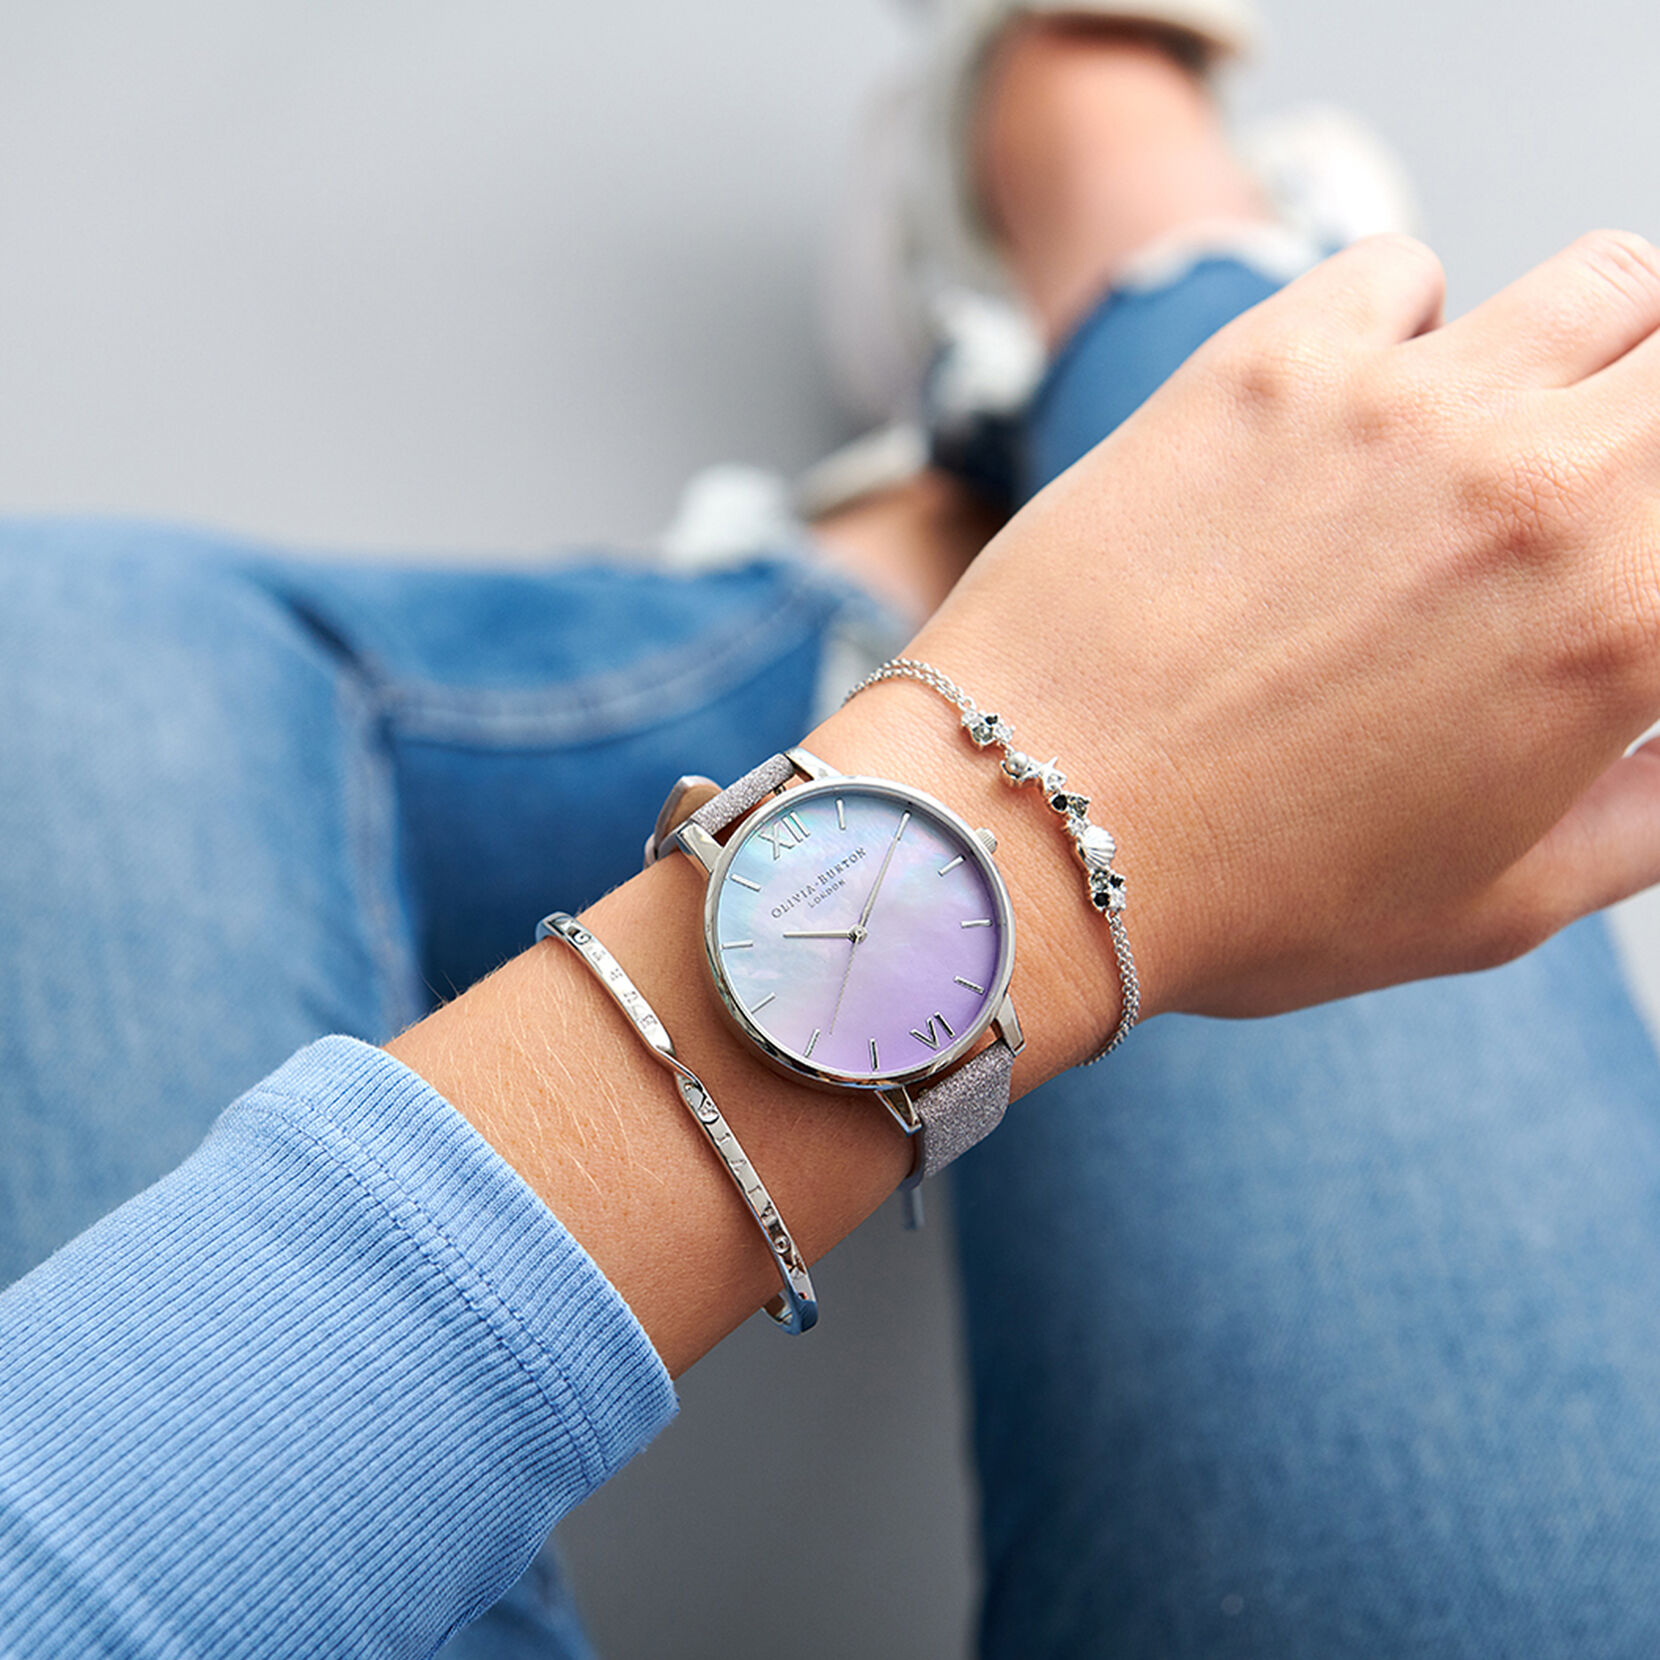 Ombre Mother Of Pearl Dial  Watch with Lilac Glitter Strap & Silver Mesh Strap Set